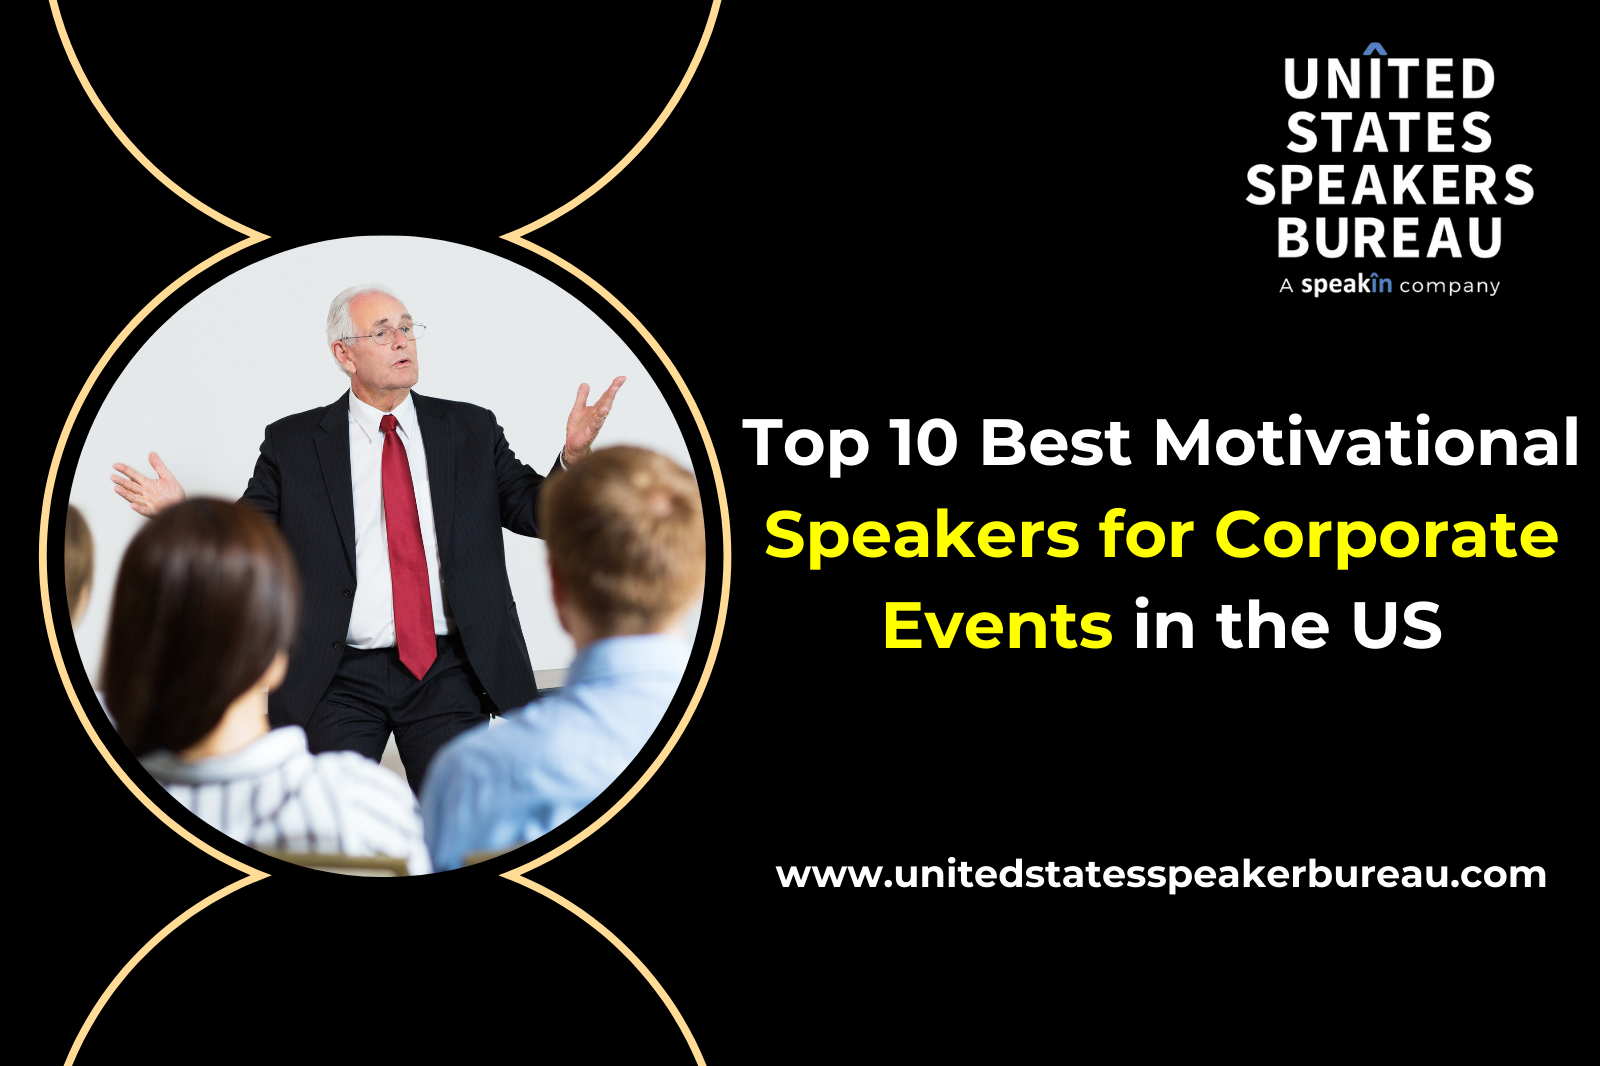 Top 10 Best Motivational Speakers for Corporate Events in the US